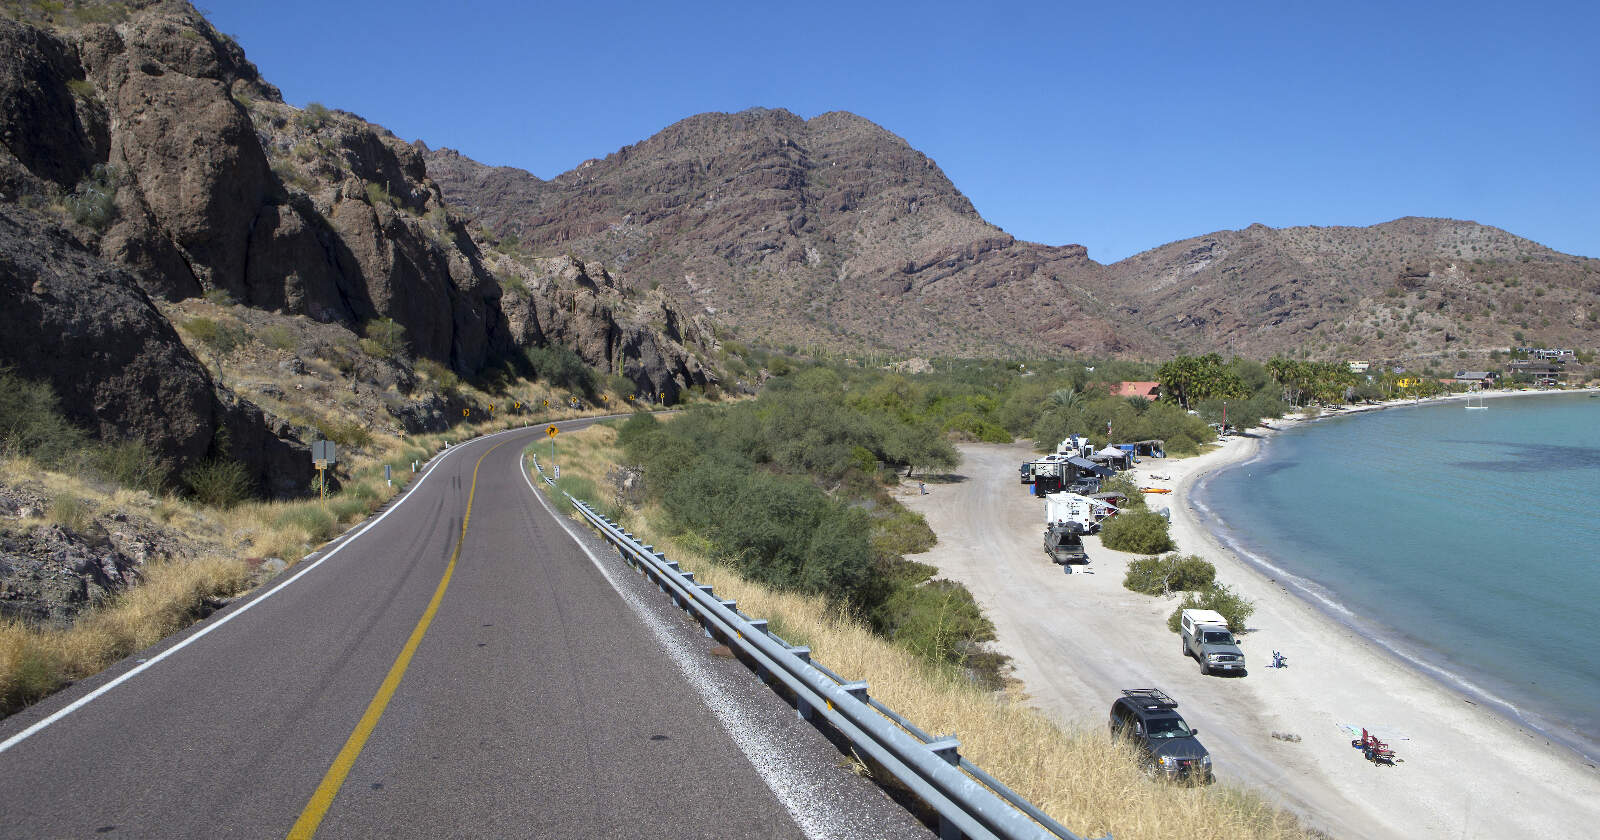 Winding narrow road with mountains in the background and vehicles and RVs camping in Baja California along the water